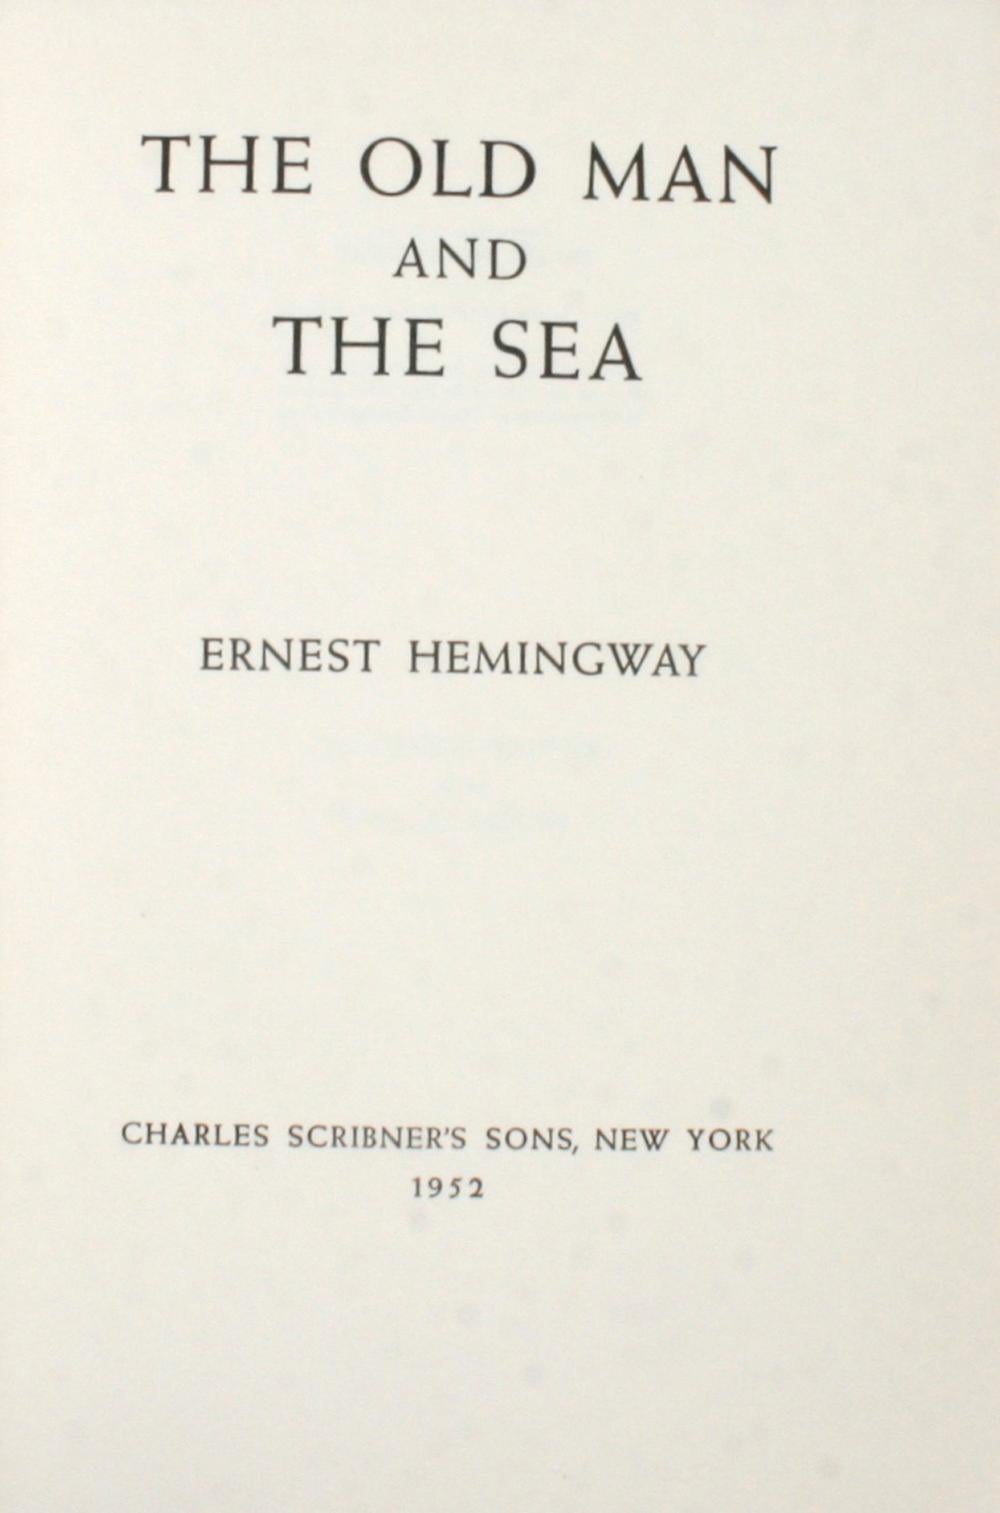 American The Old Man and the Sea by Ernest Hemingway